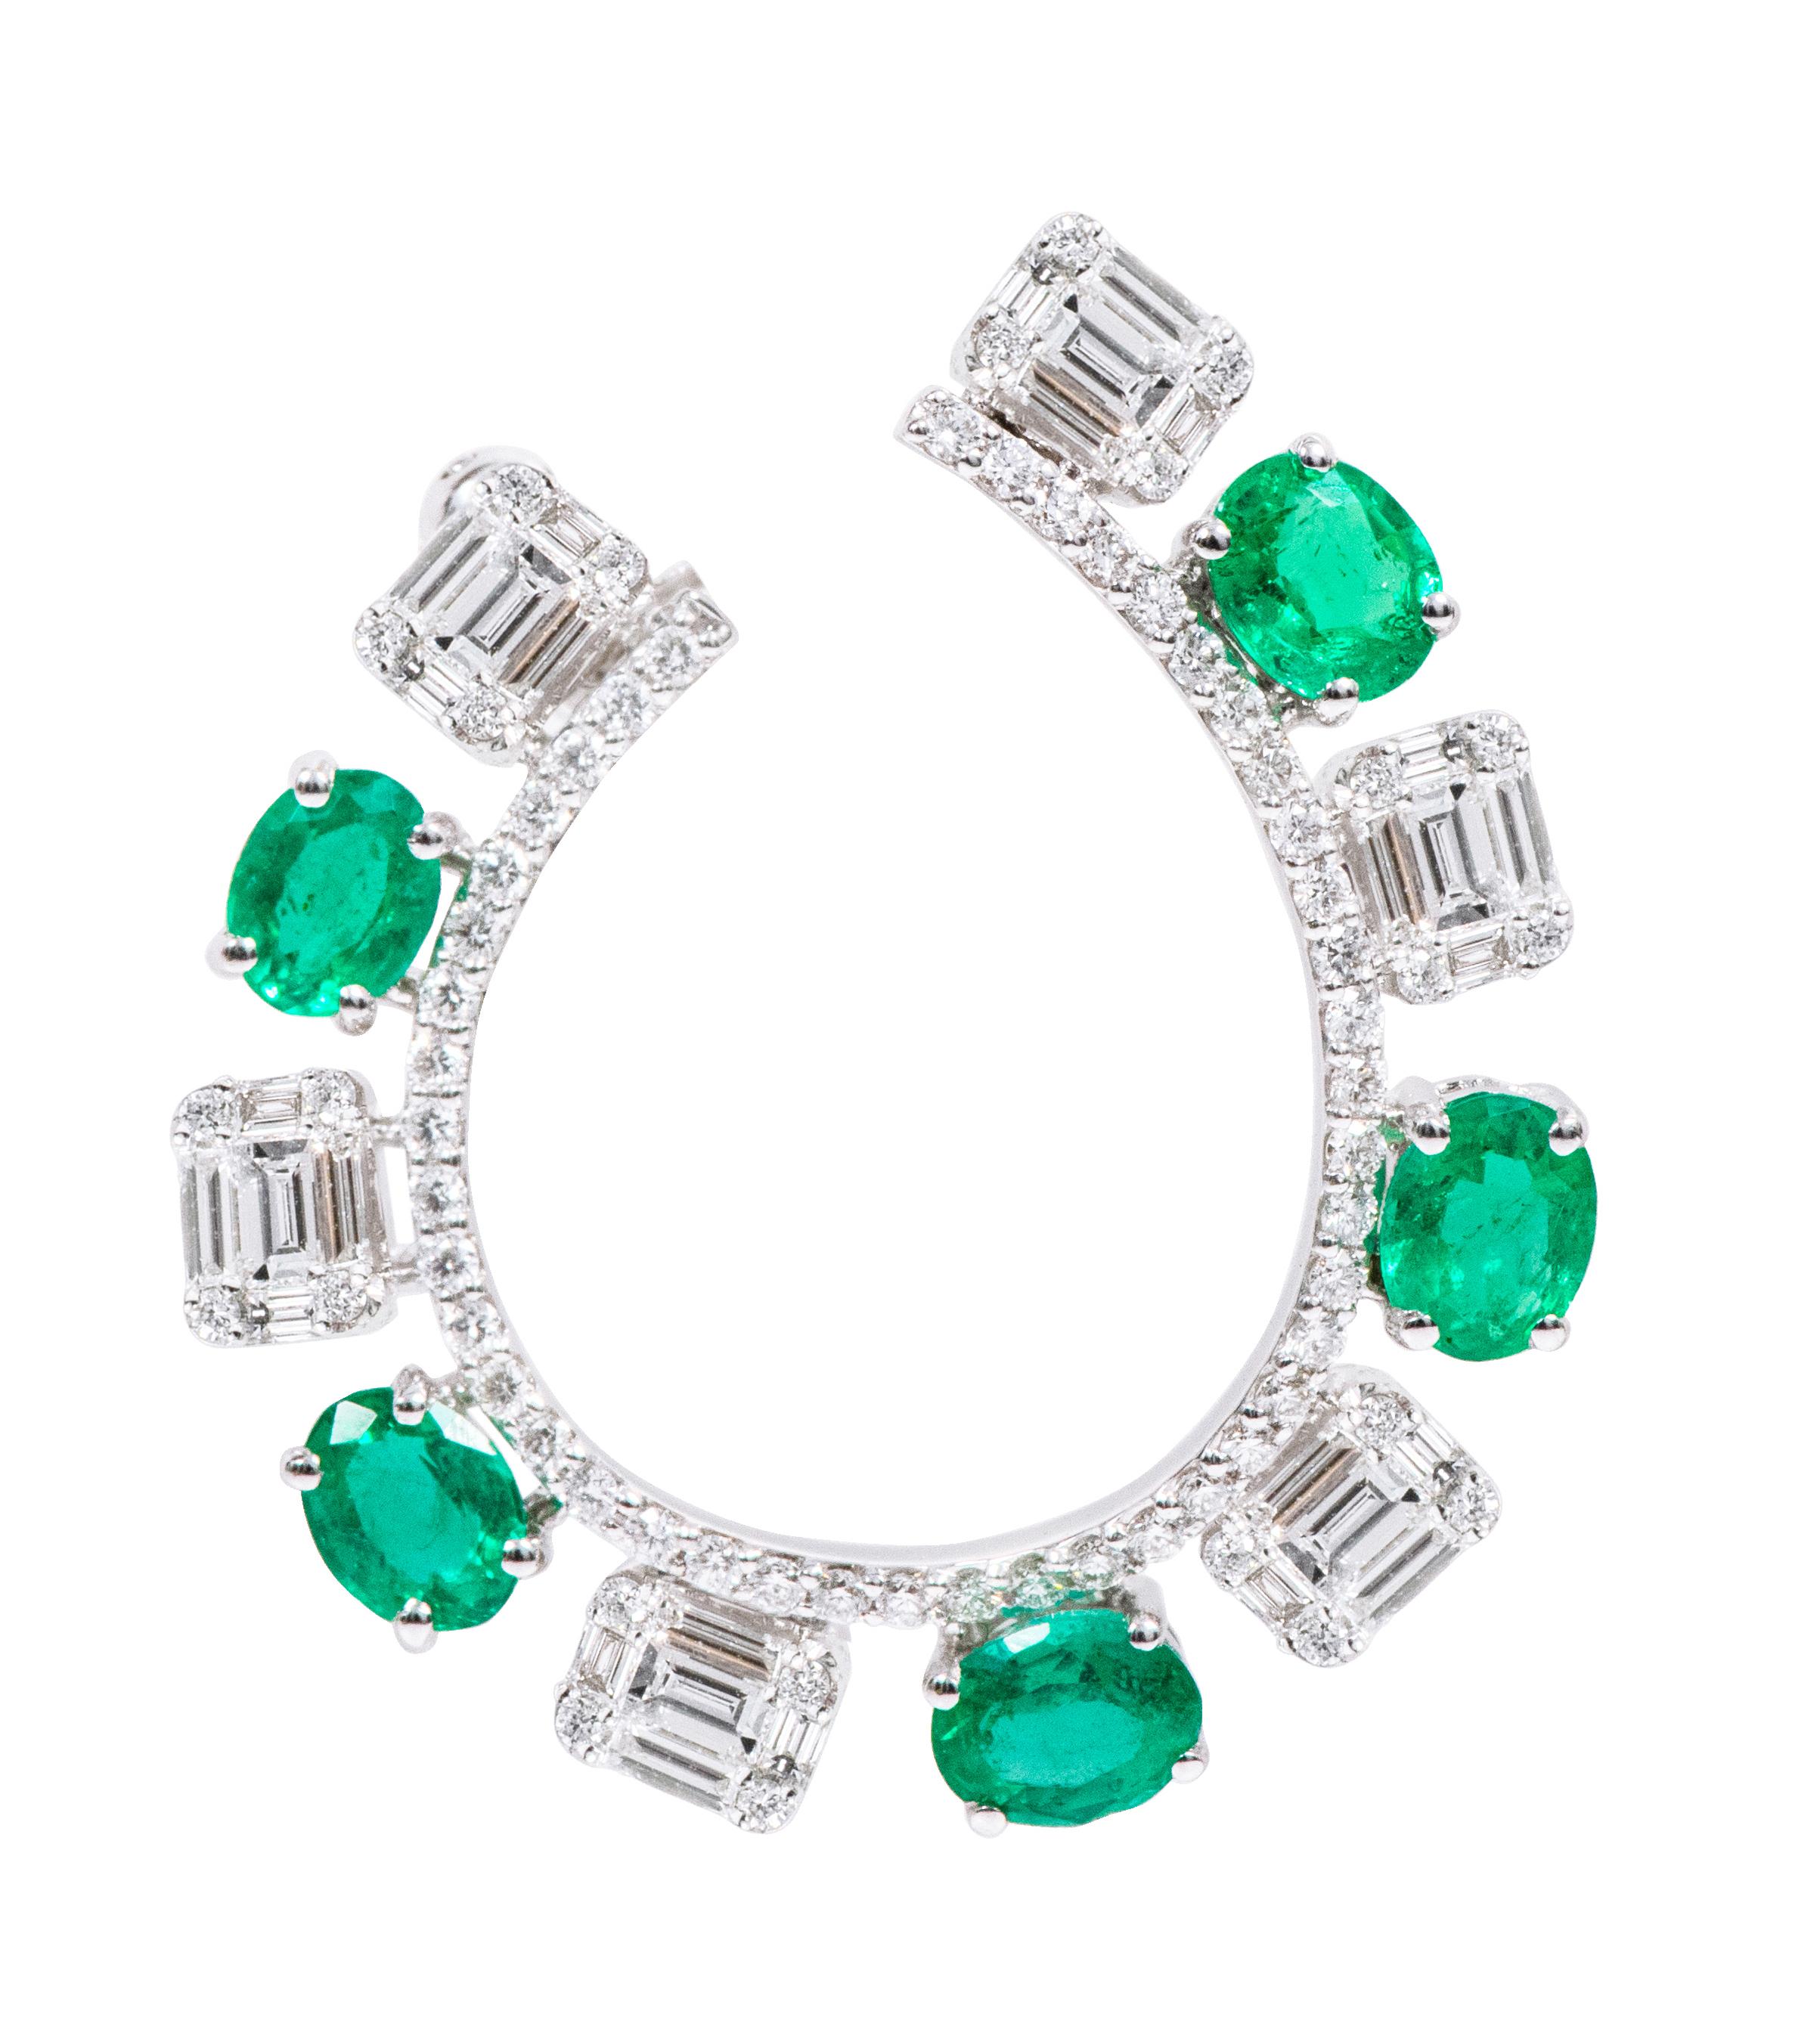 18 Karat White Gold 5.15 Carat Diamond and Natural Emerald Modified Hoop Earring For Sale 1